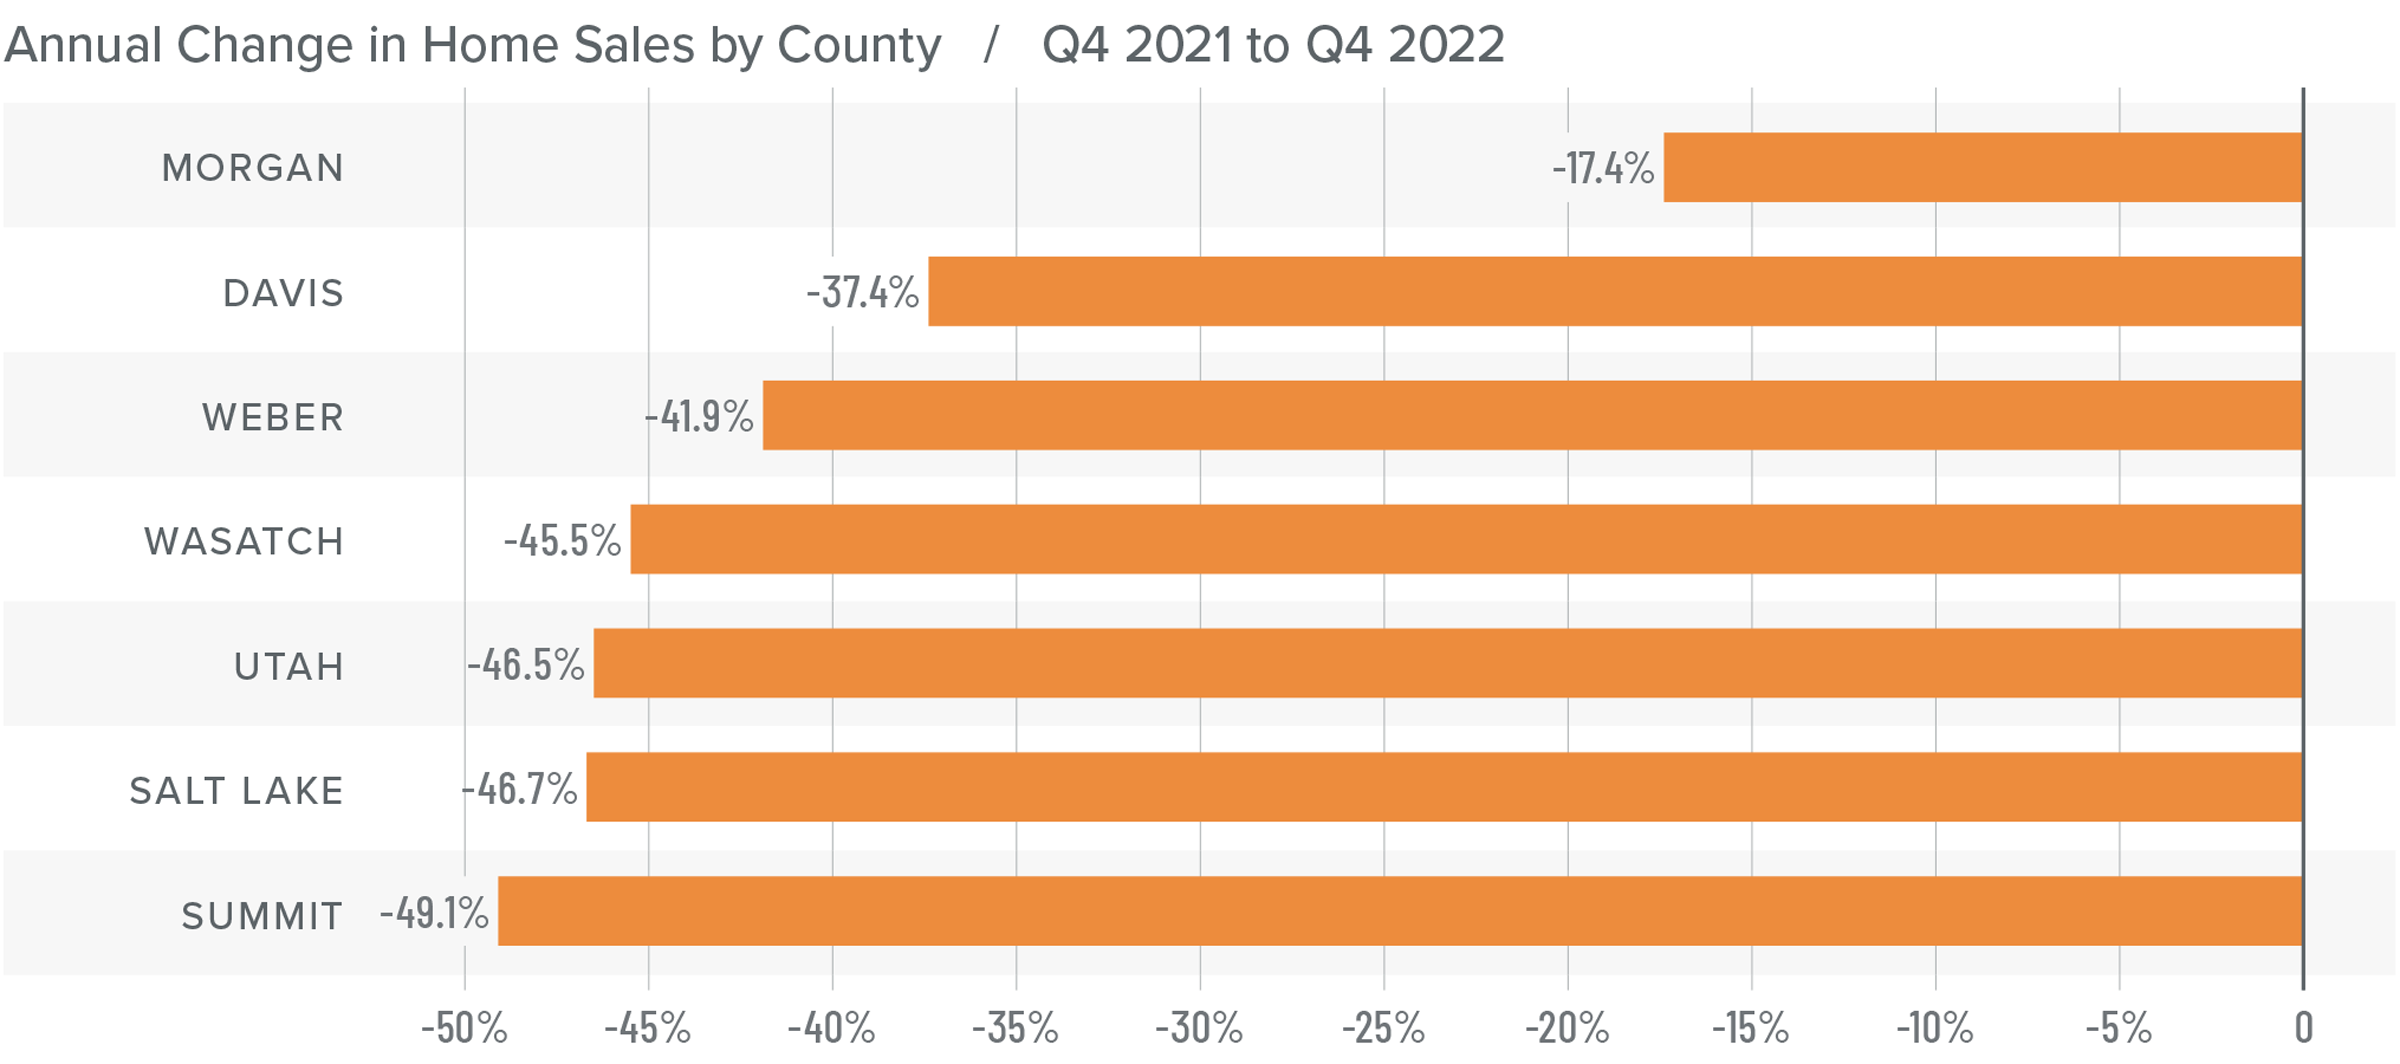 A bar graph showing the annual change in home sales for various counties in Utah from Q4 2021 to Q4 2022. All counties have a negative percentage year-over-year change. Here are the totals: Morgan at -17.4%, Davis at -37.4%, Weber at -41.9%, Wasatch at -45.5%, Utah County at -46.5%, Salt Lake at -46.7%, and Summit at -49.1%.